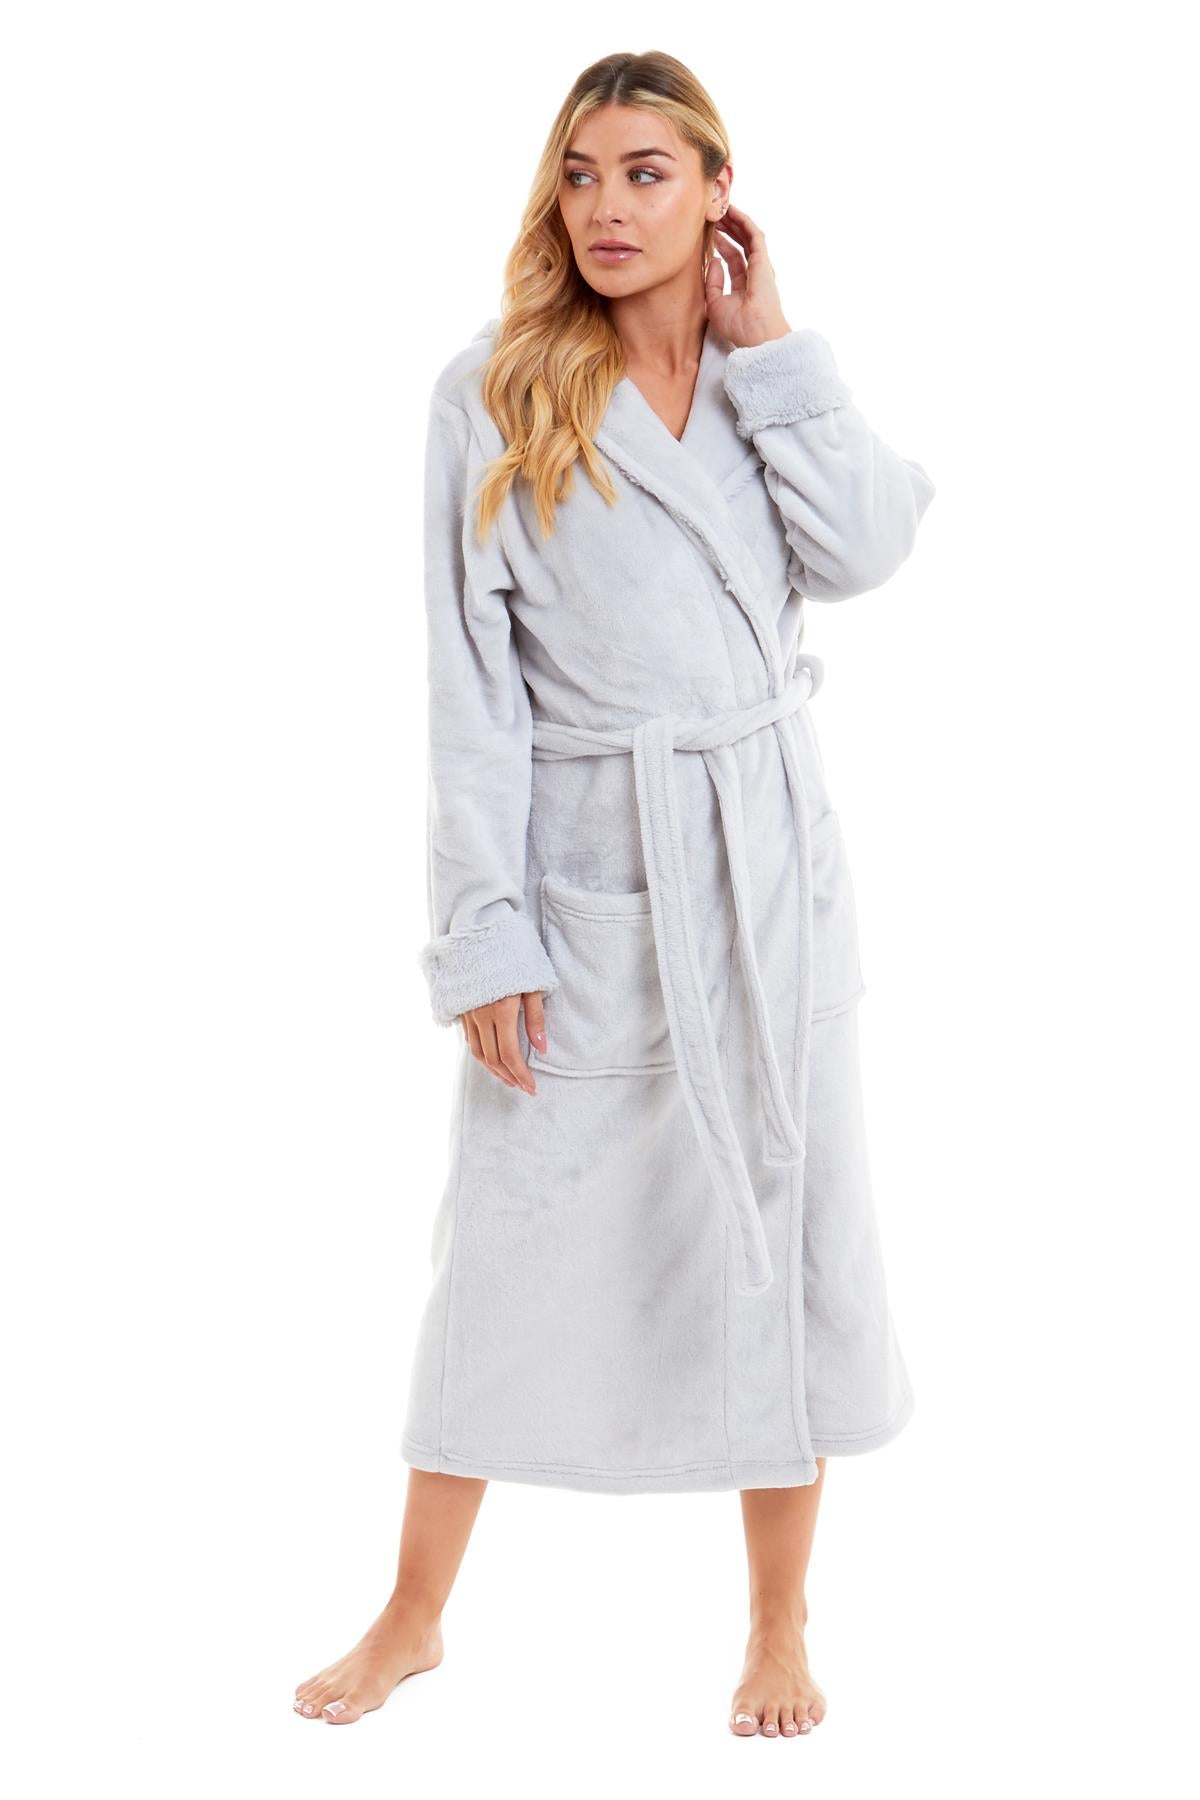 Women's Faux Fur Hooded Robe Dressing Gown Bath Robe Super Soft Luxury Gowns OLIVIA ROCCO Dressing Gown